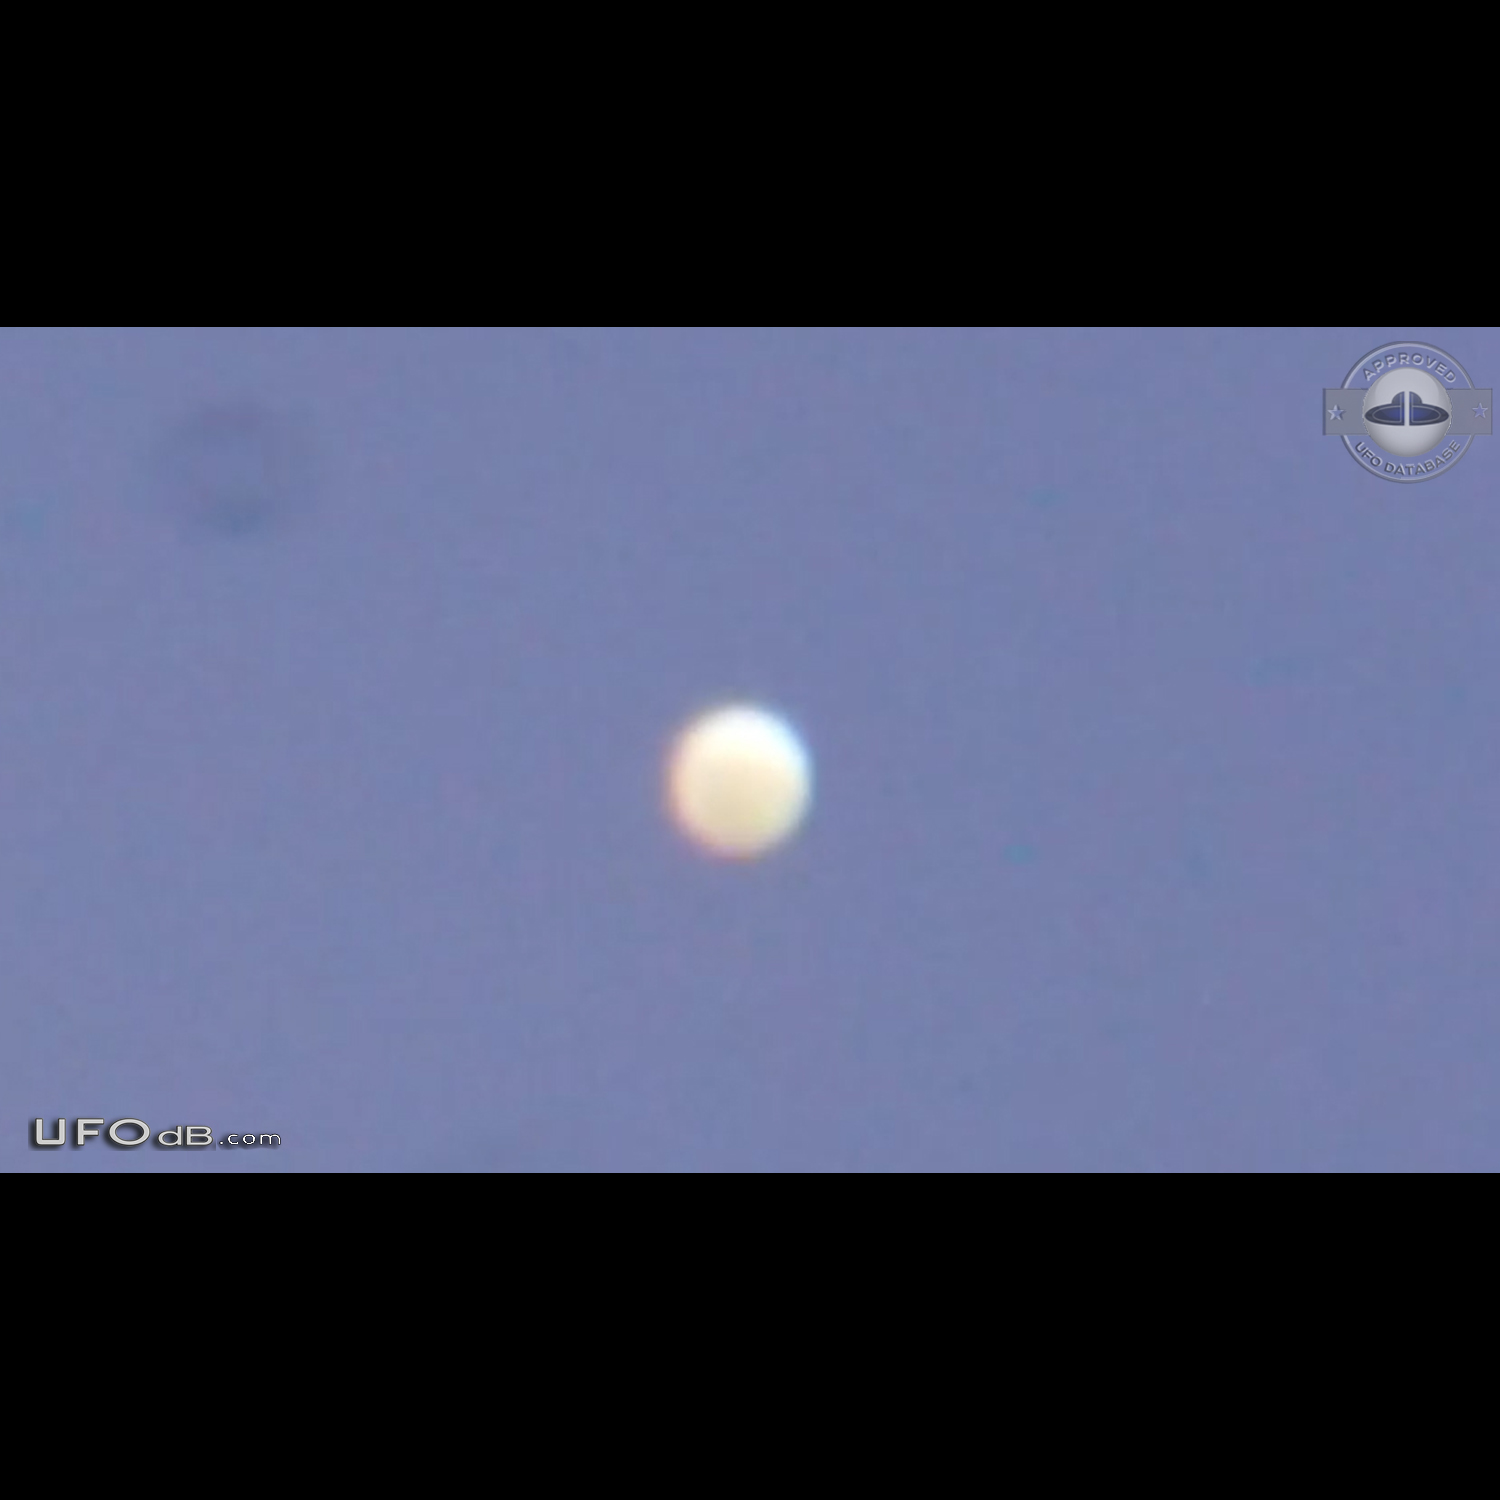 Orb captured with telescope at UFO Sighting Event - California 2016 UFO Picture #788-1